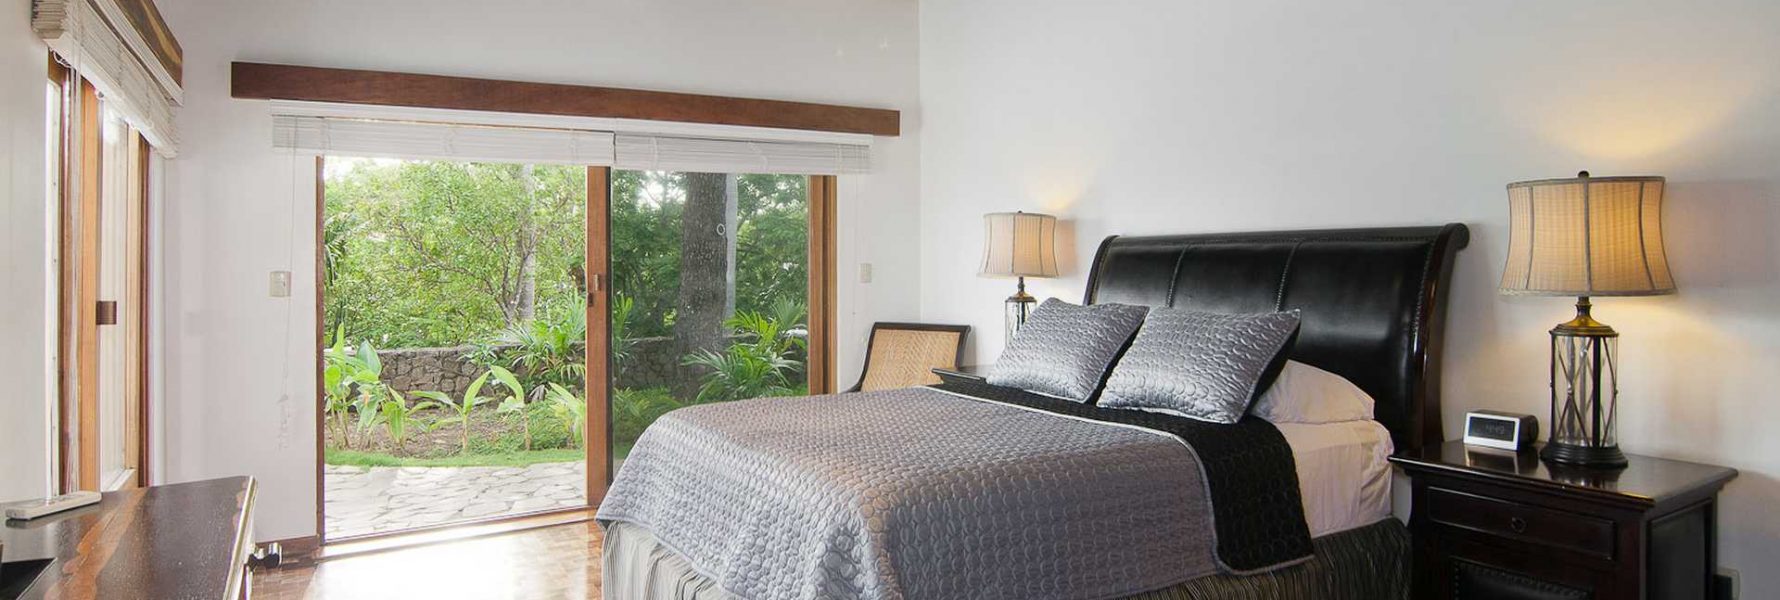 Relaxation is only one word of many that will certainly come to mind as you indulge in this cozy bedroom.